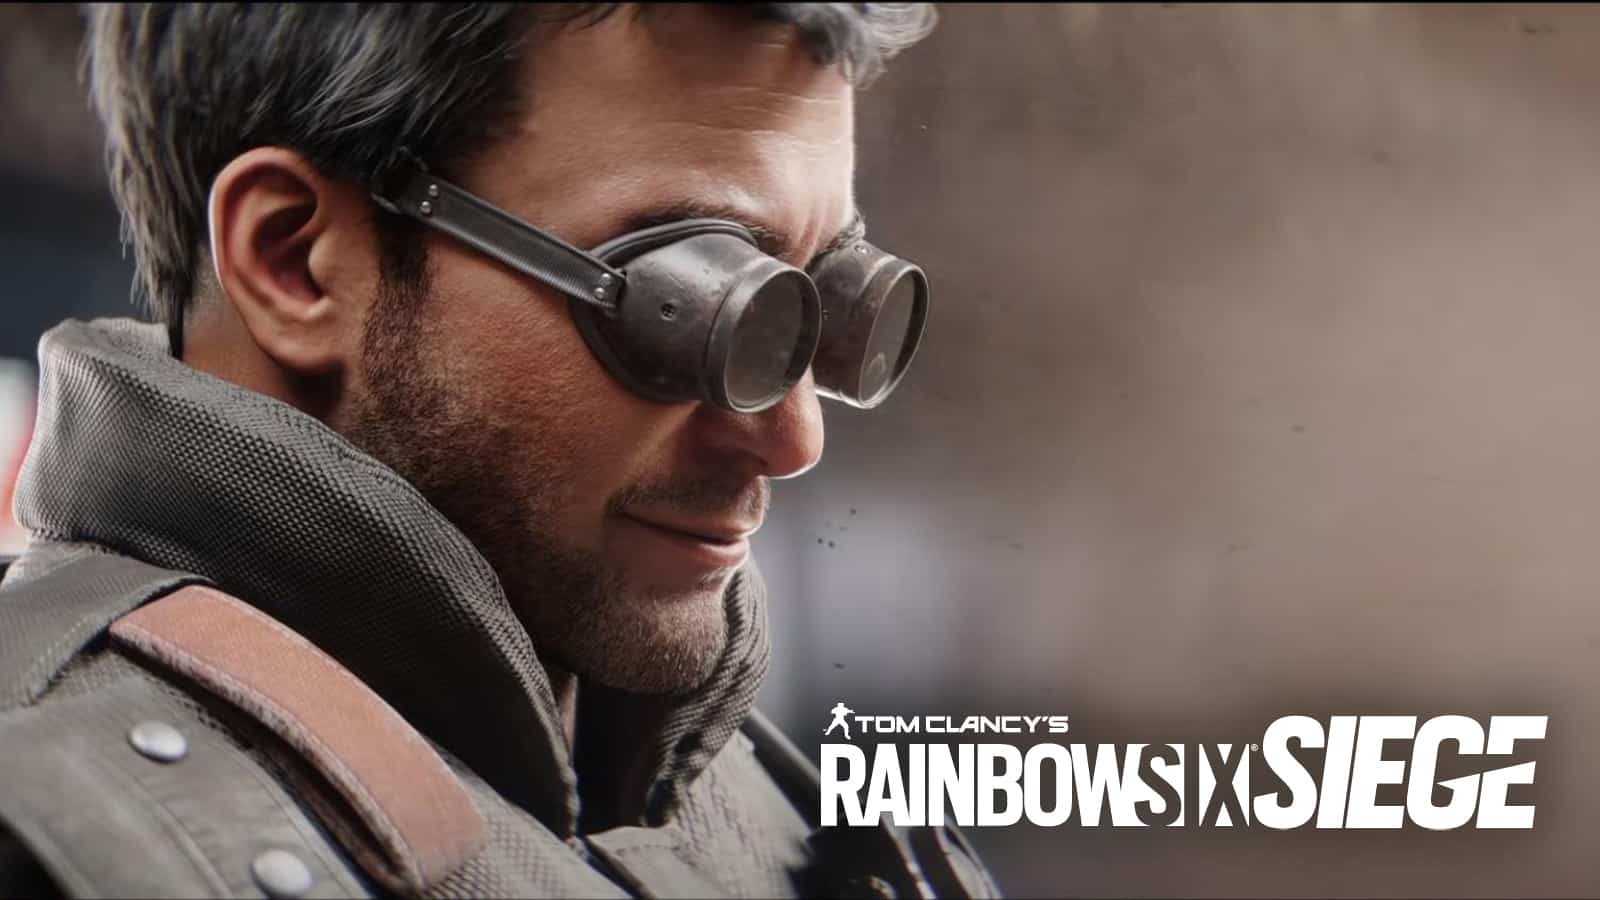 Rainbow Six Siege adds cross-play and cross-progression for PC and